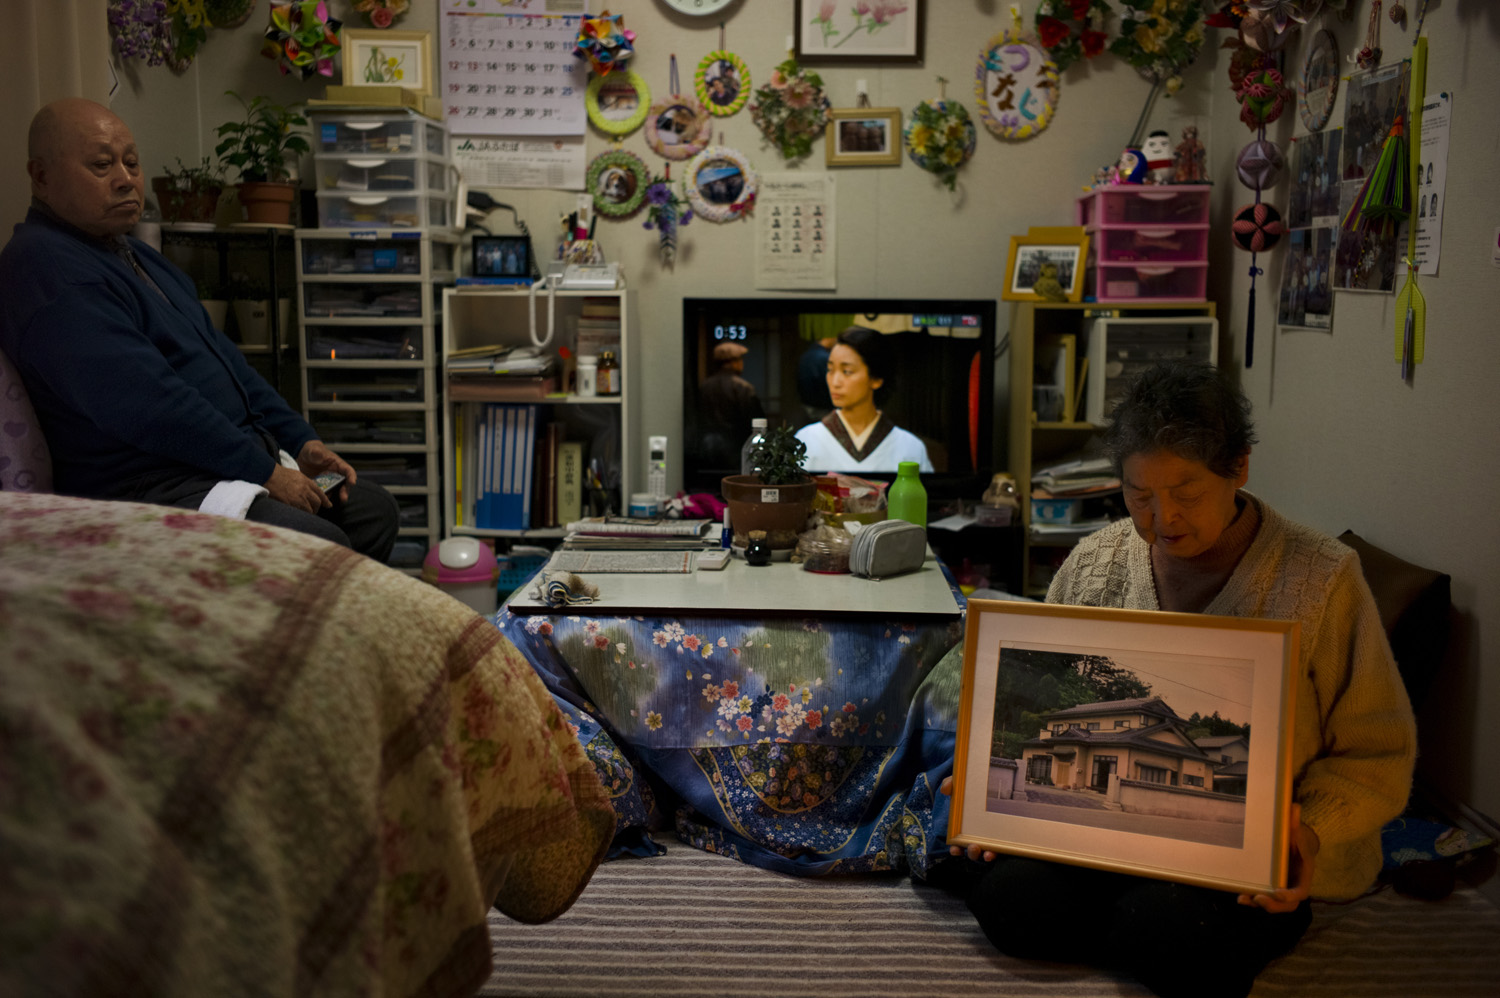 Japan, Aizuwakamatsu, 2014. Idogawa Ikuko 82 (right) holds a picture of their old house which was located in Okuma and now too radiated to return to as her husband Idogawa tsuguo 85 (left) sits with her in their sleeping and living room decorated with trinkets and hand made crafts in the temporary housing they were assigned to.